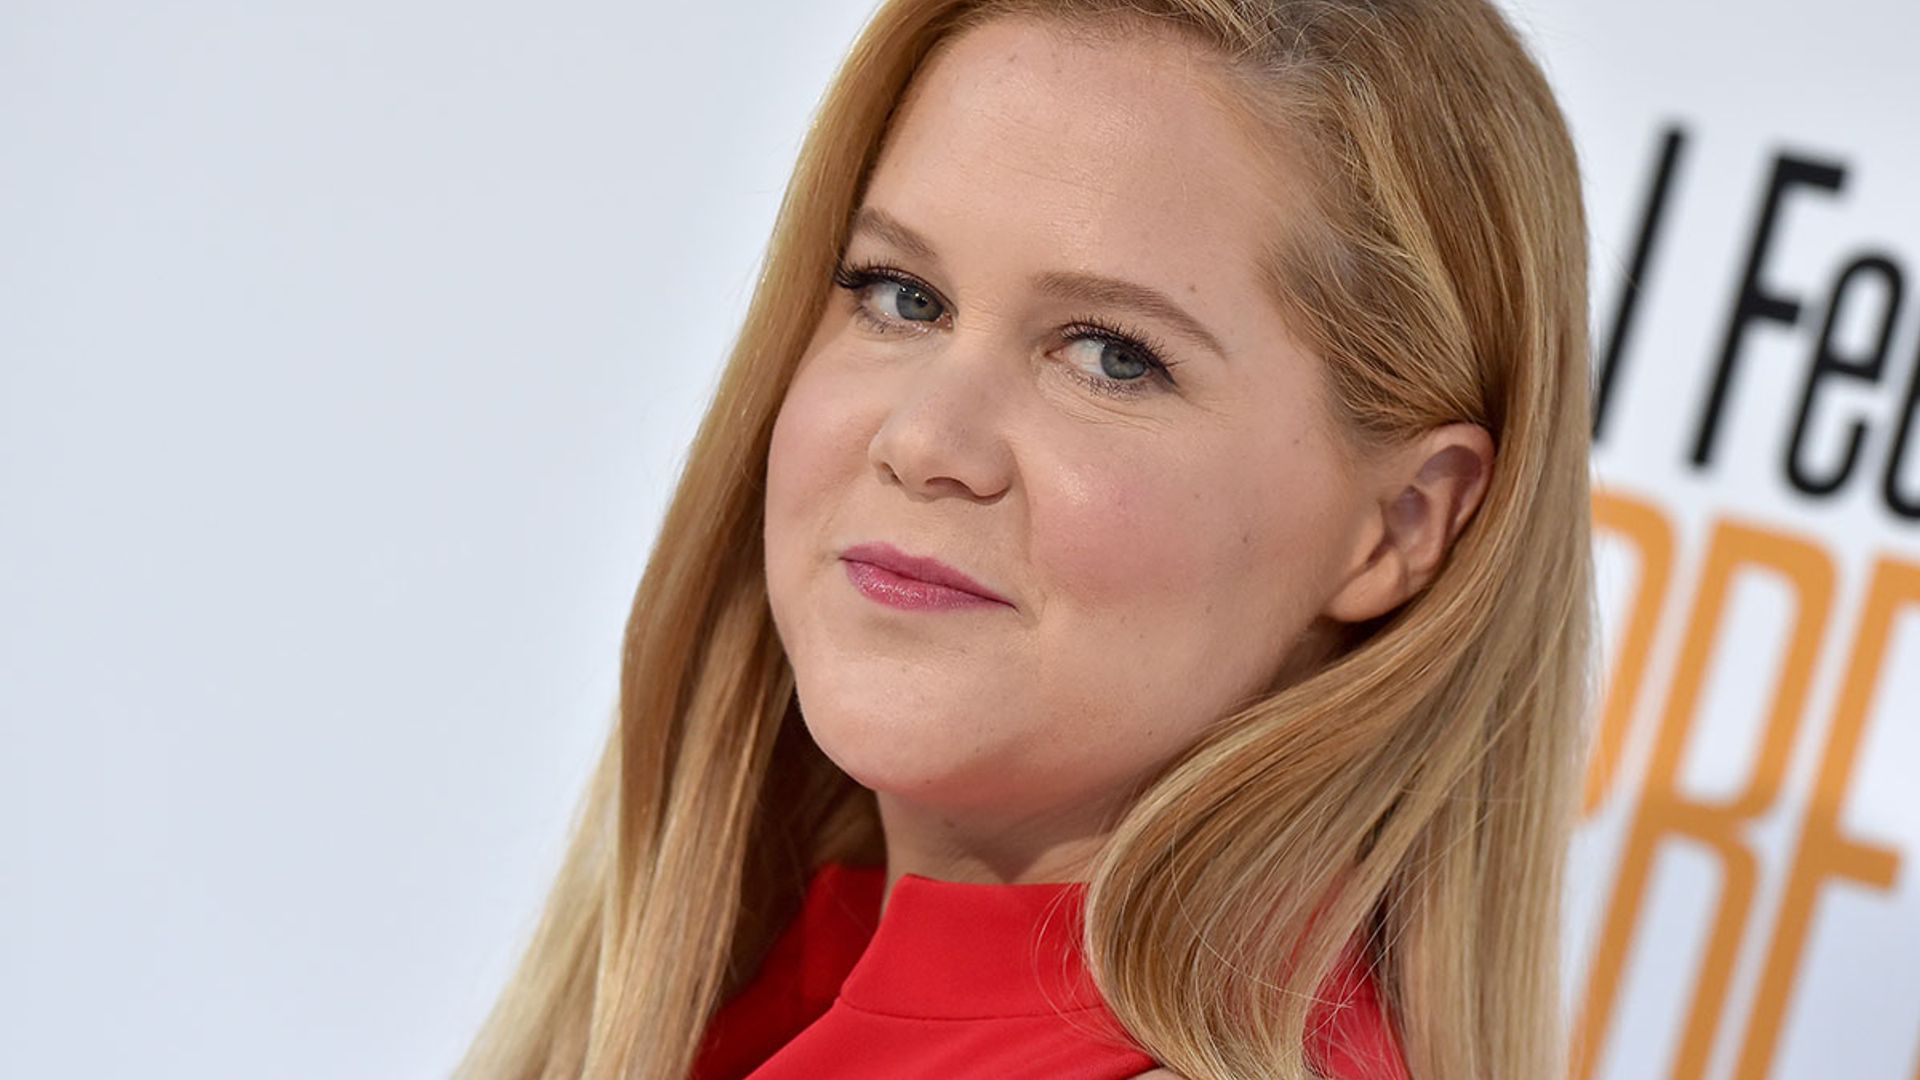 Amy Schumer shares video with doctor after finding tumor in appendix – watch